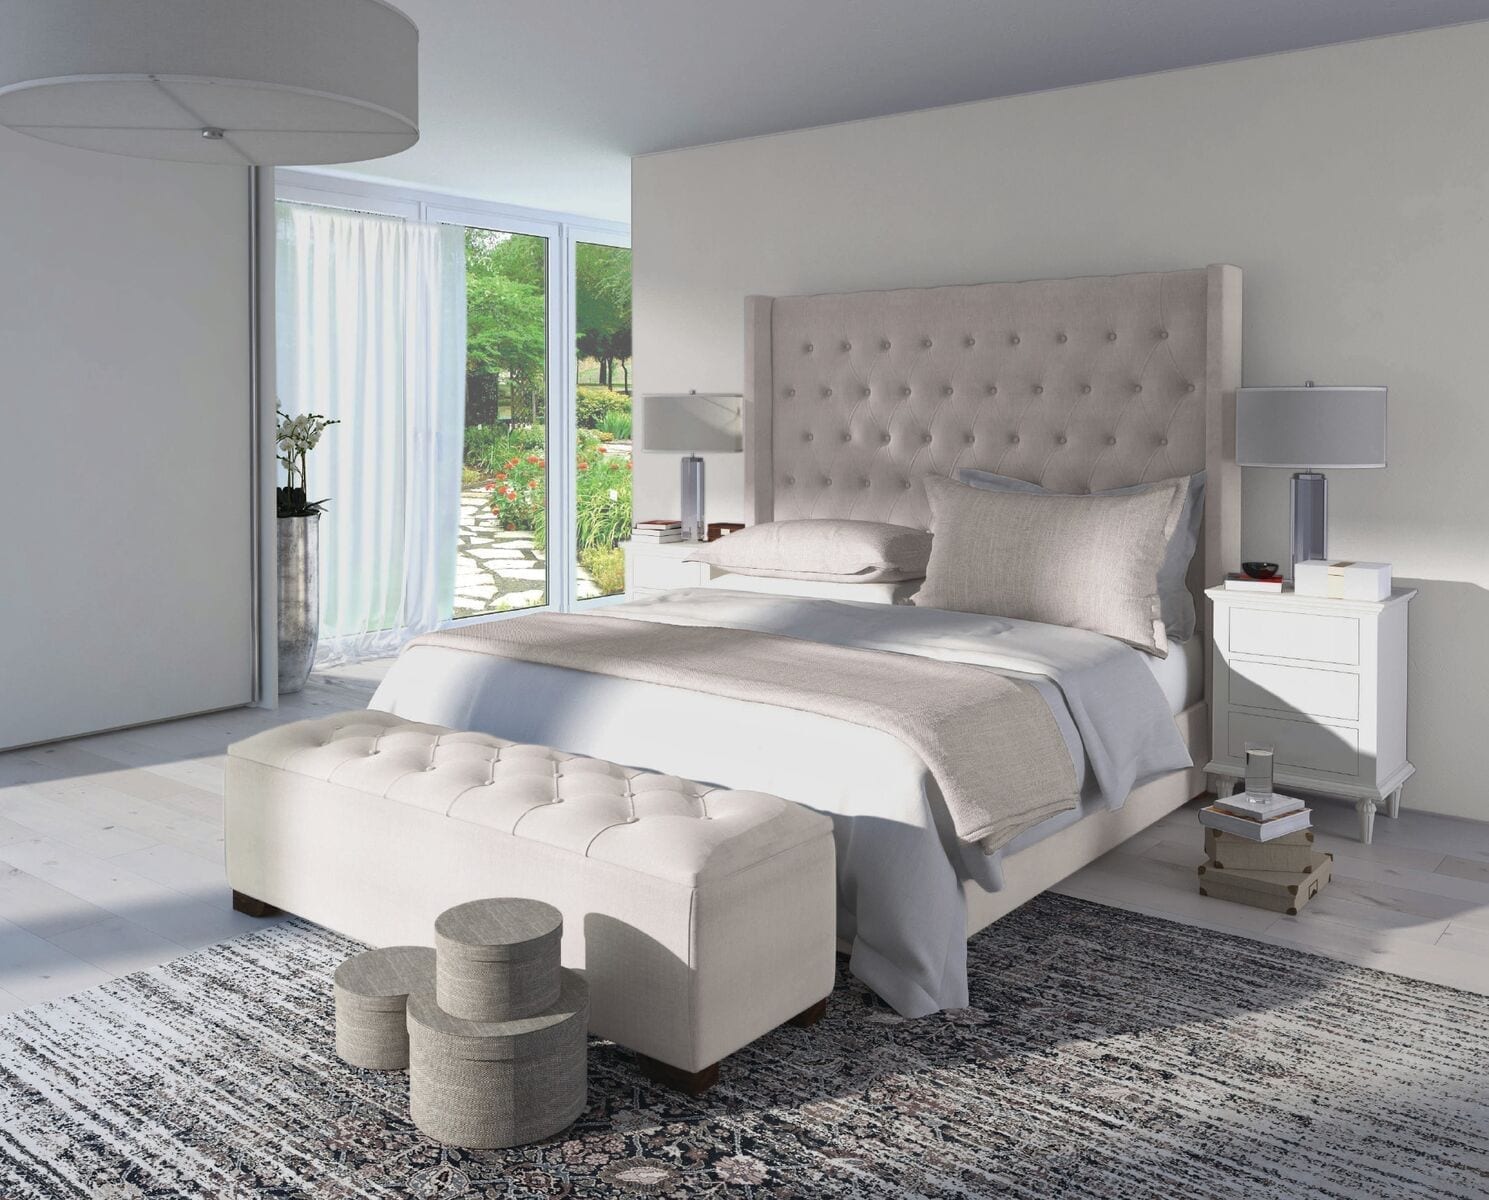 Vincent custom upholstered bed - bed with wall panel headboard and custom wall panels | Blend Home Furnishings